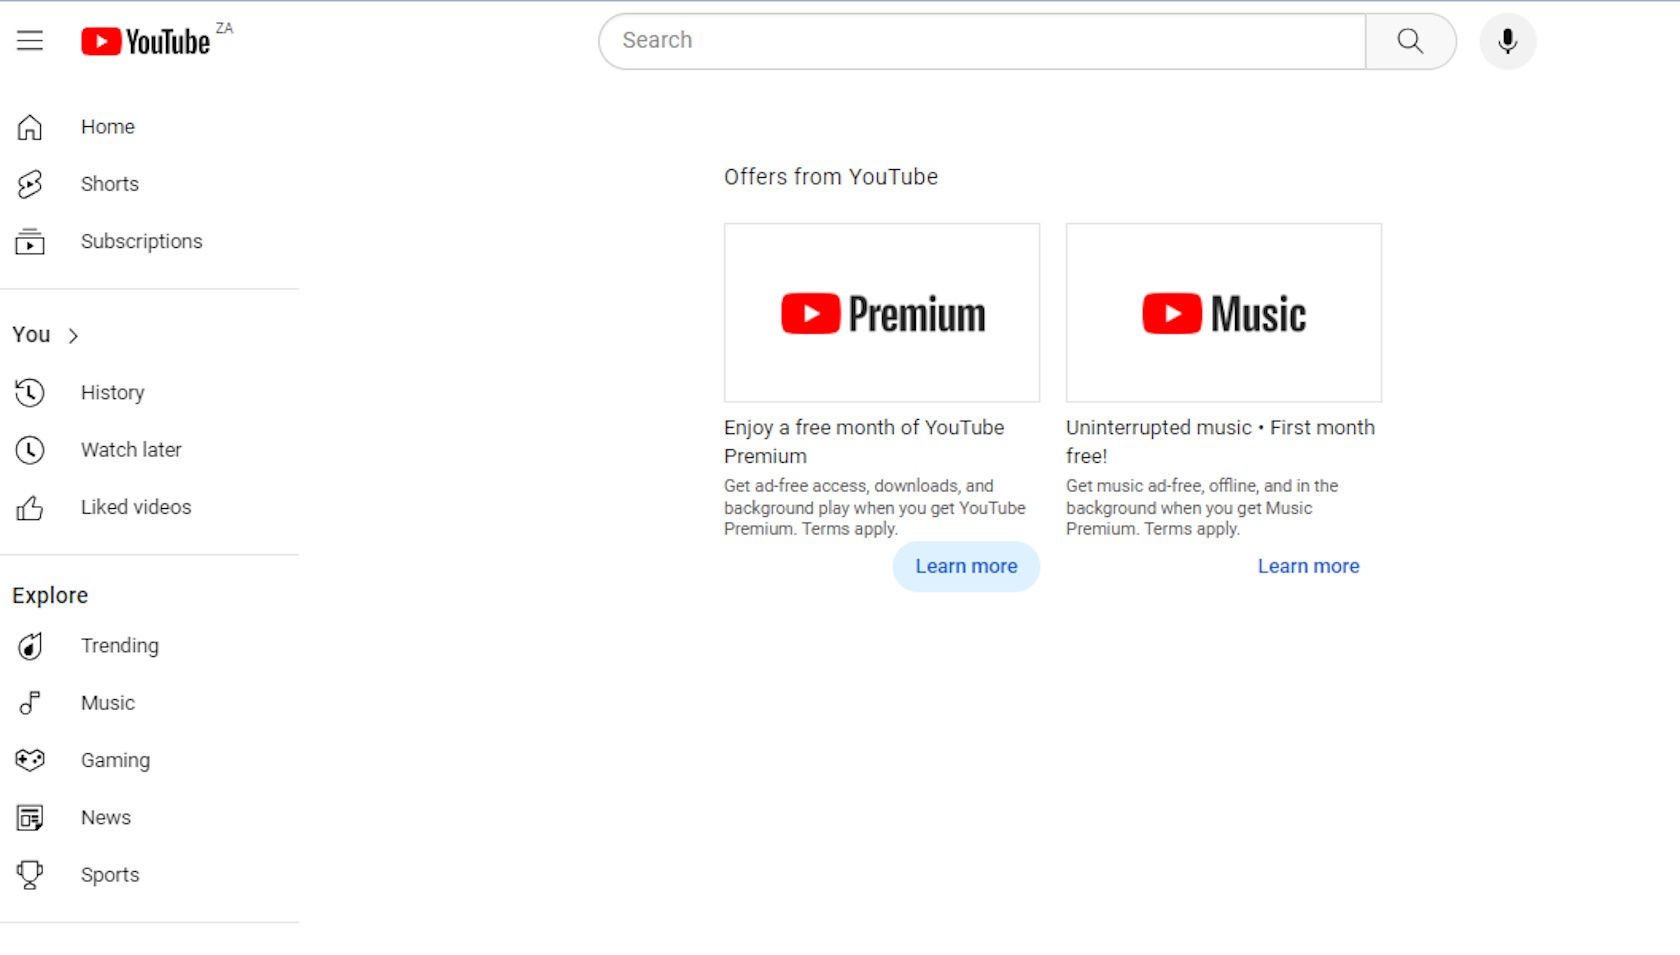 YouTube web browser offers from YouTube